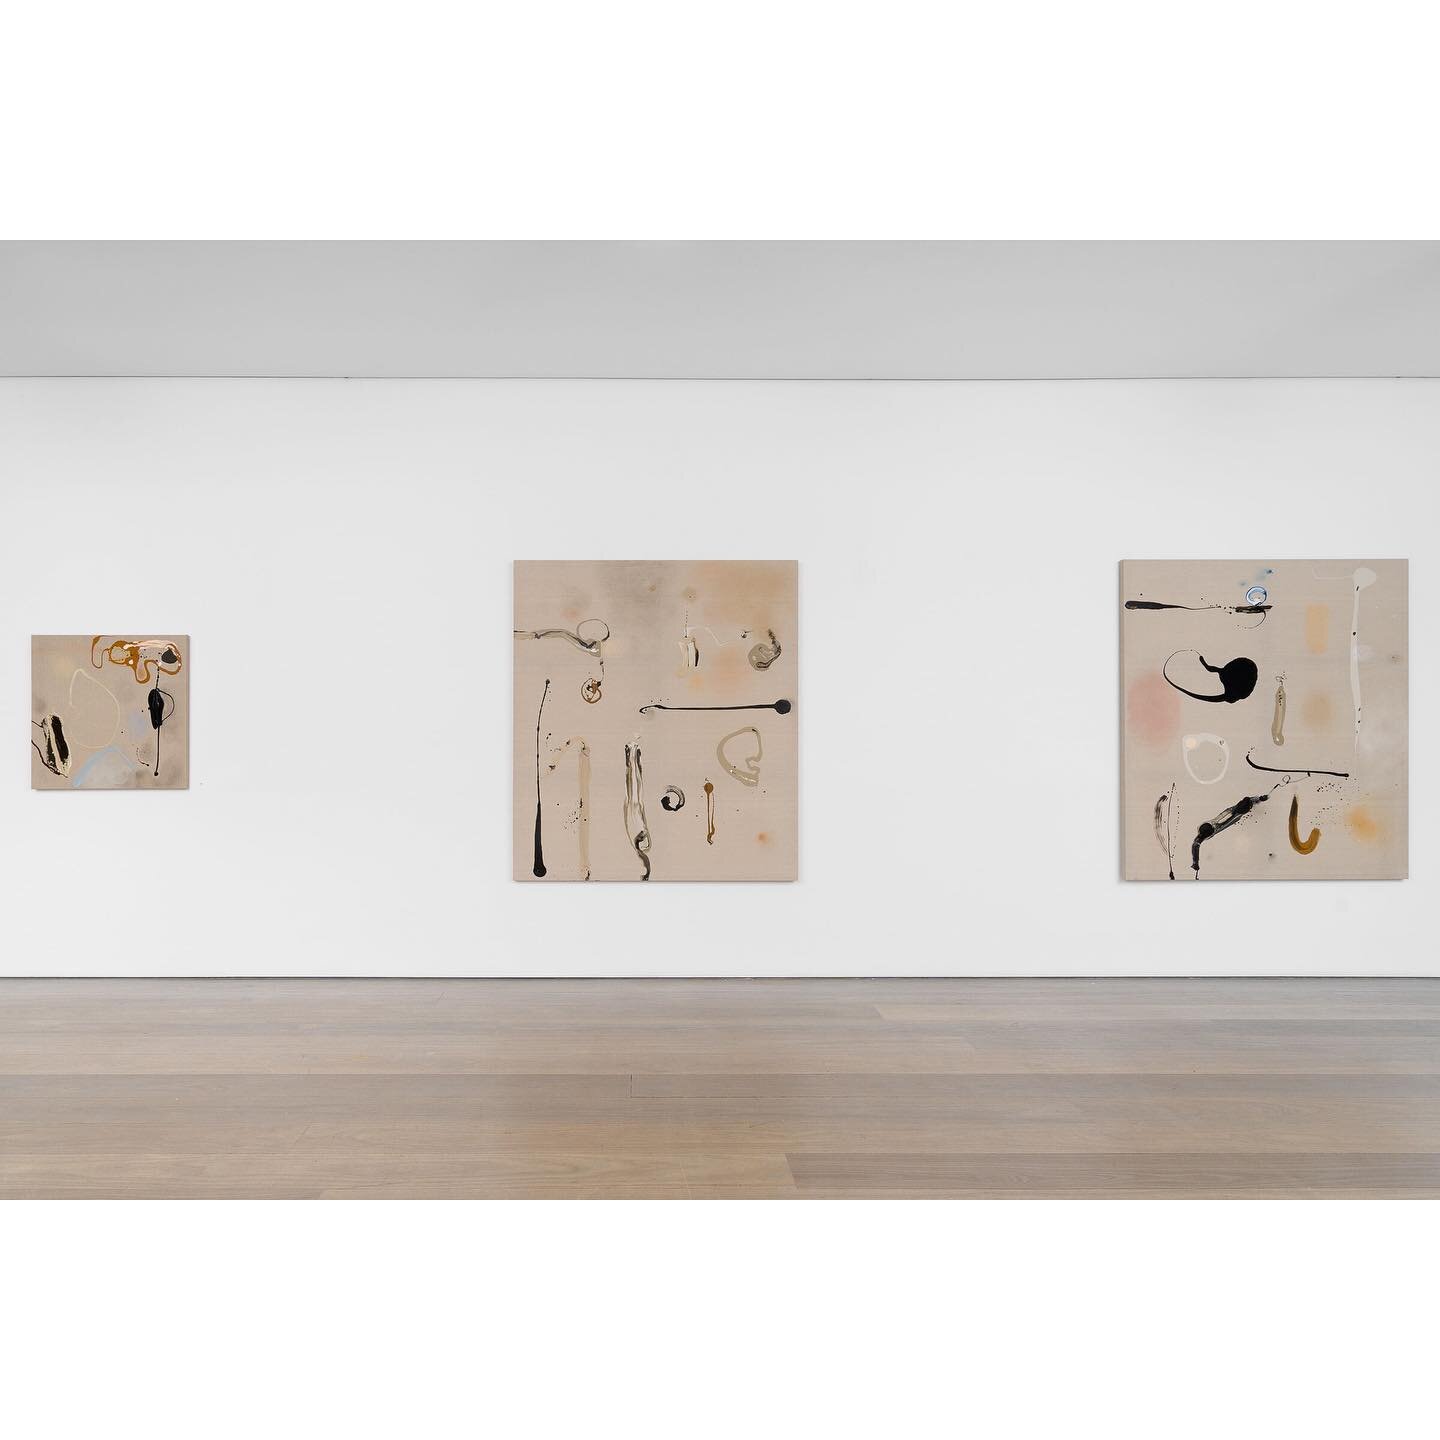 Installation views of LOUISE OLSEN&rsquo;S &lsquo;Haiku&rsquo; Gallery open Tues - Fri 10-6 and Sat 10-

Photography by @docqment. 

Olsen extends her fascination with balance and the relationship between bold, gestural mark making and the sensitivit